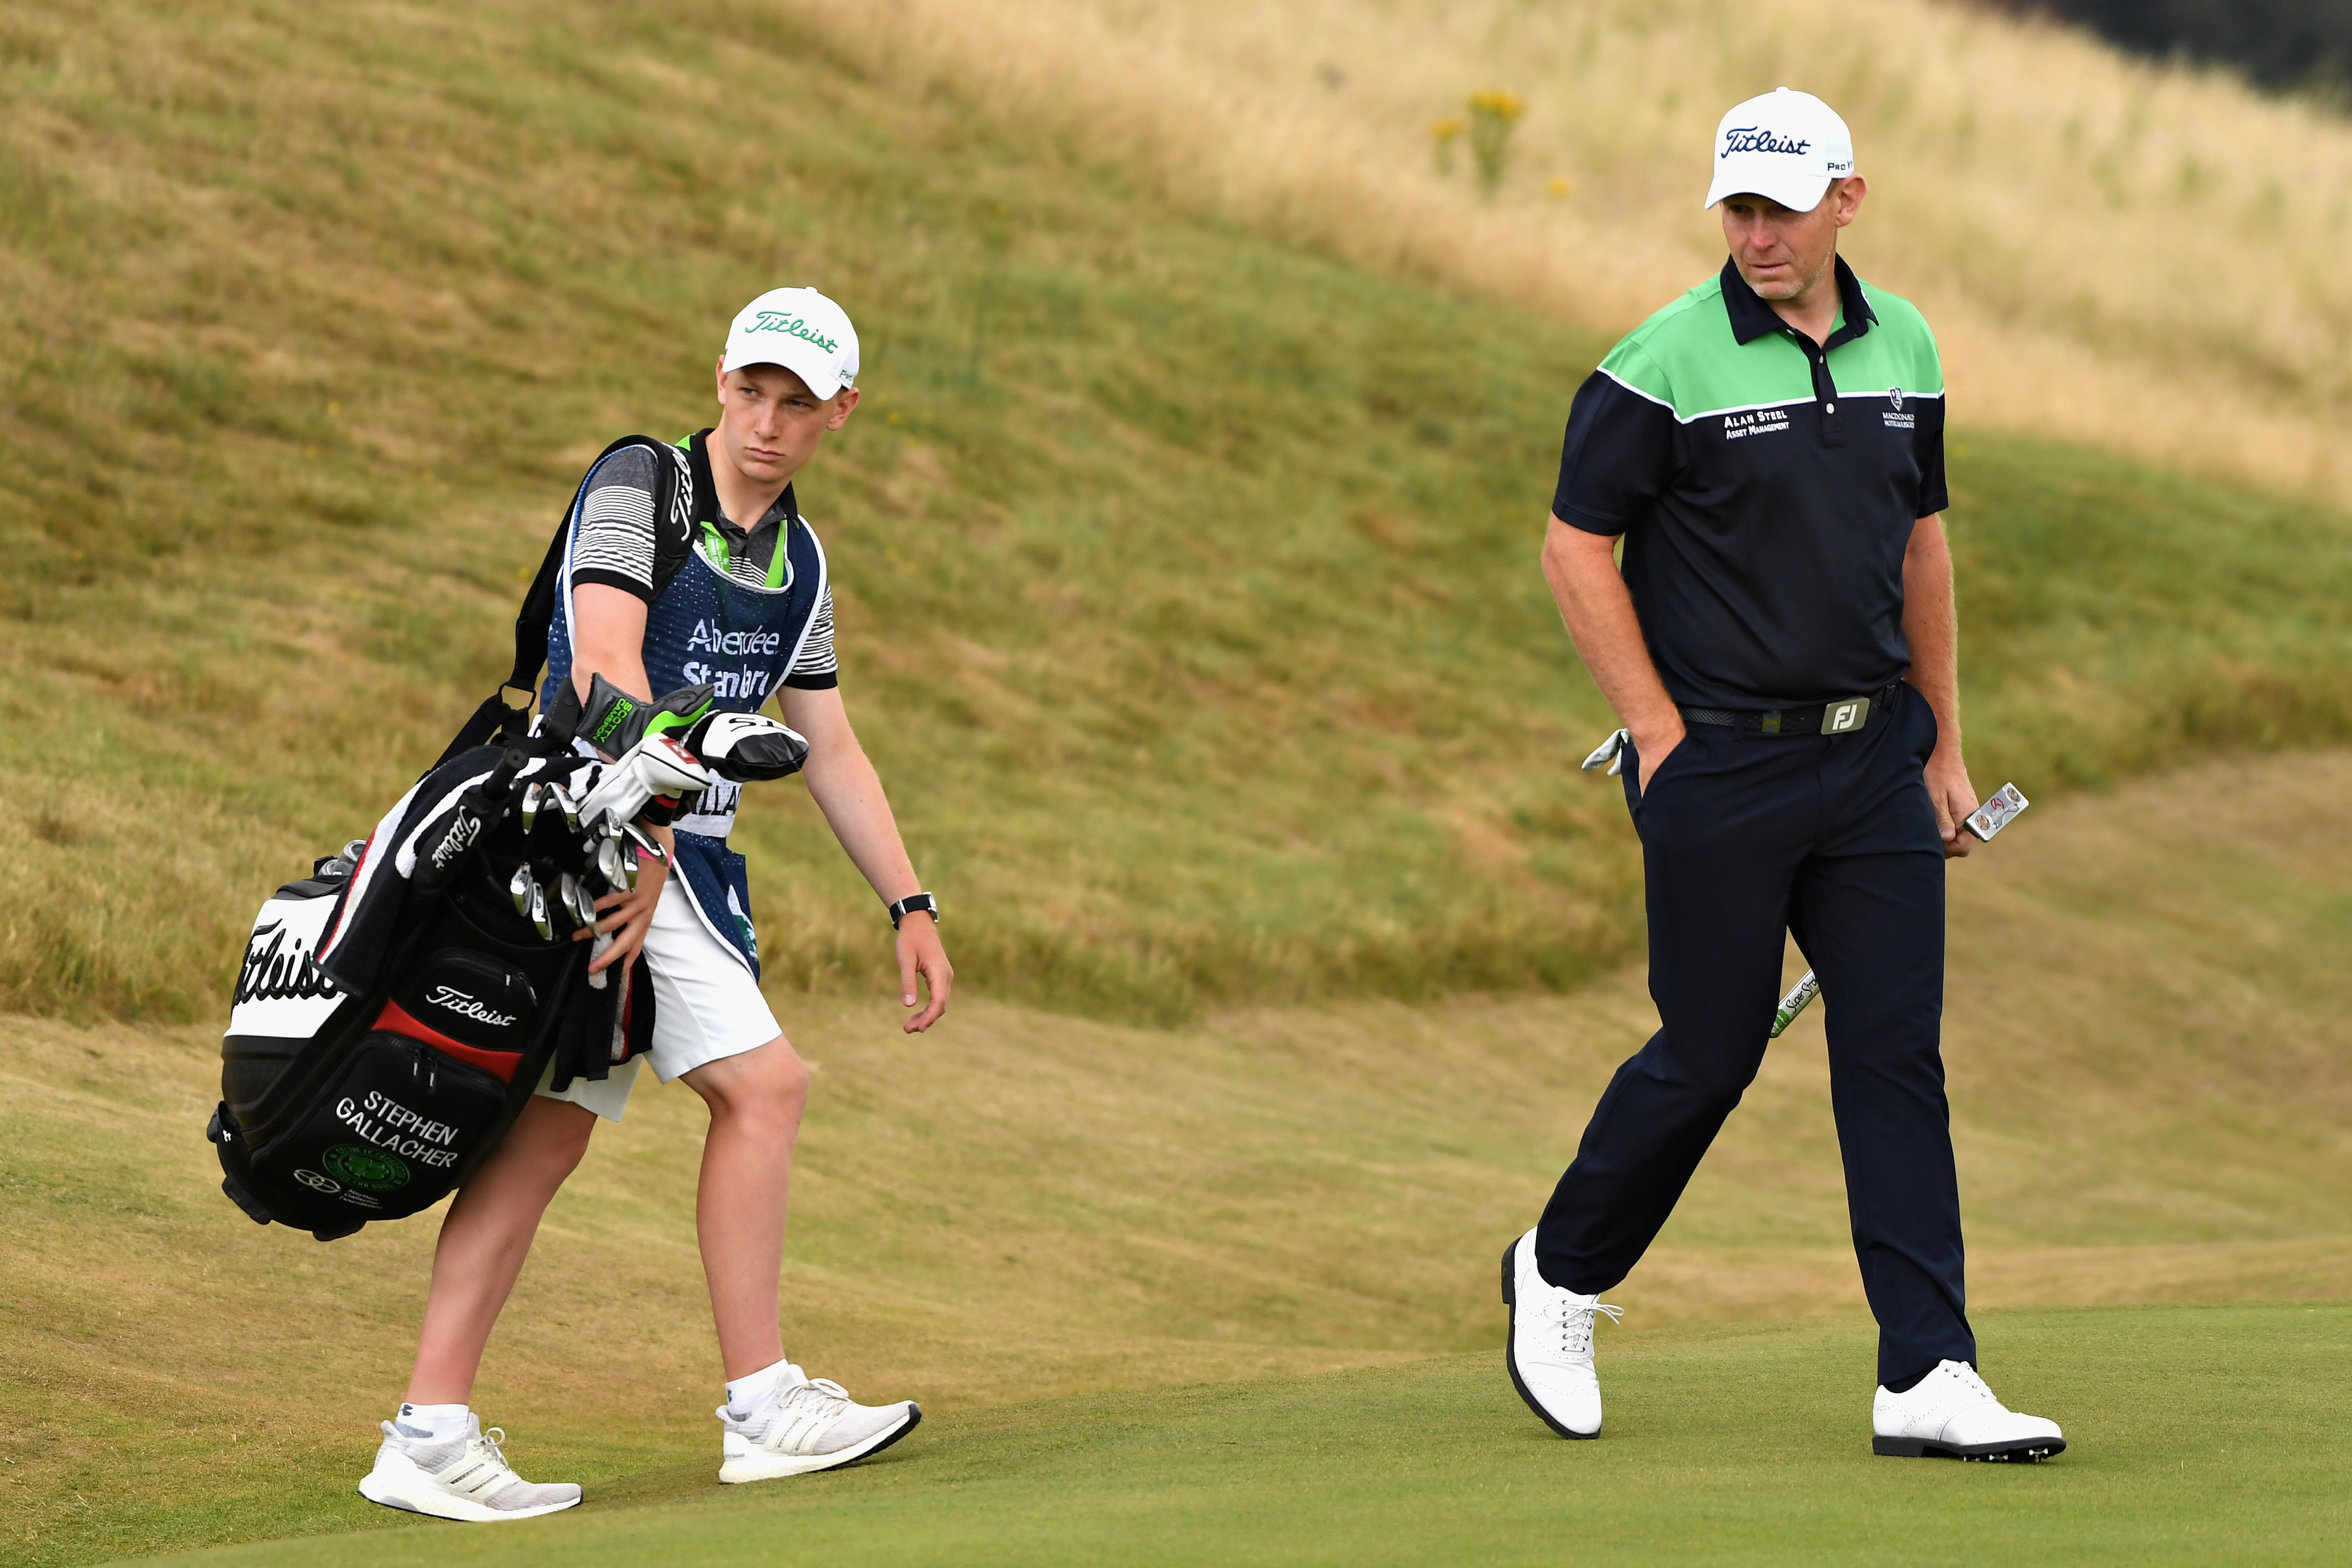 Stephen Gallacher and his caddie, son Jack during his final round 66 at Gullane.